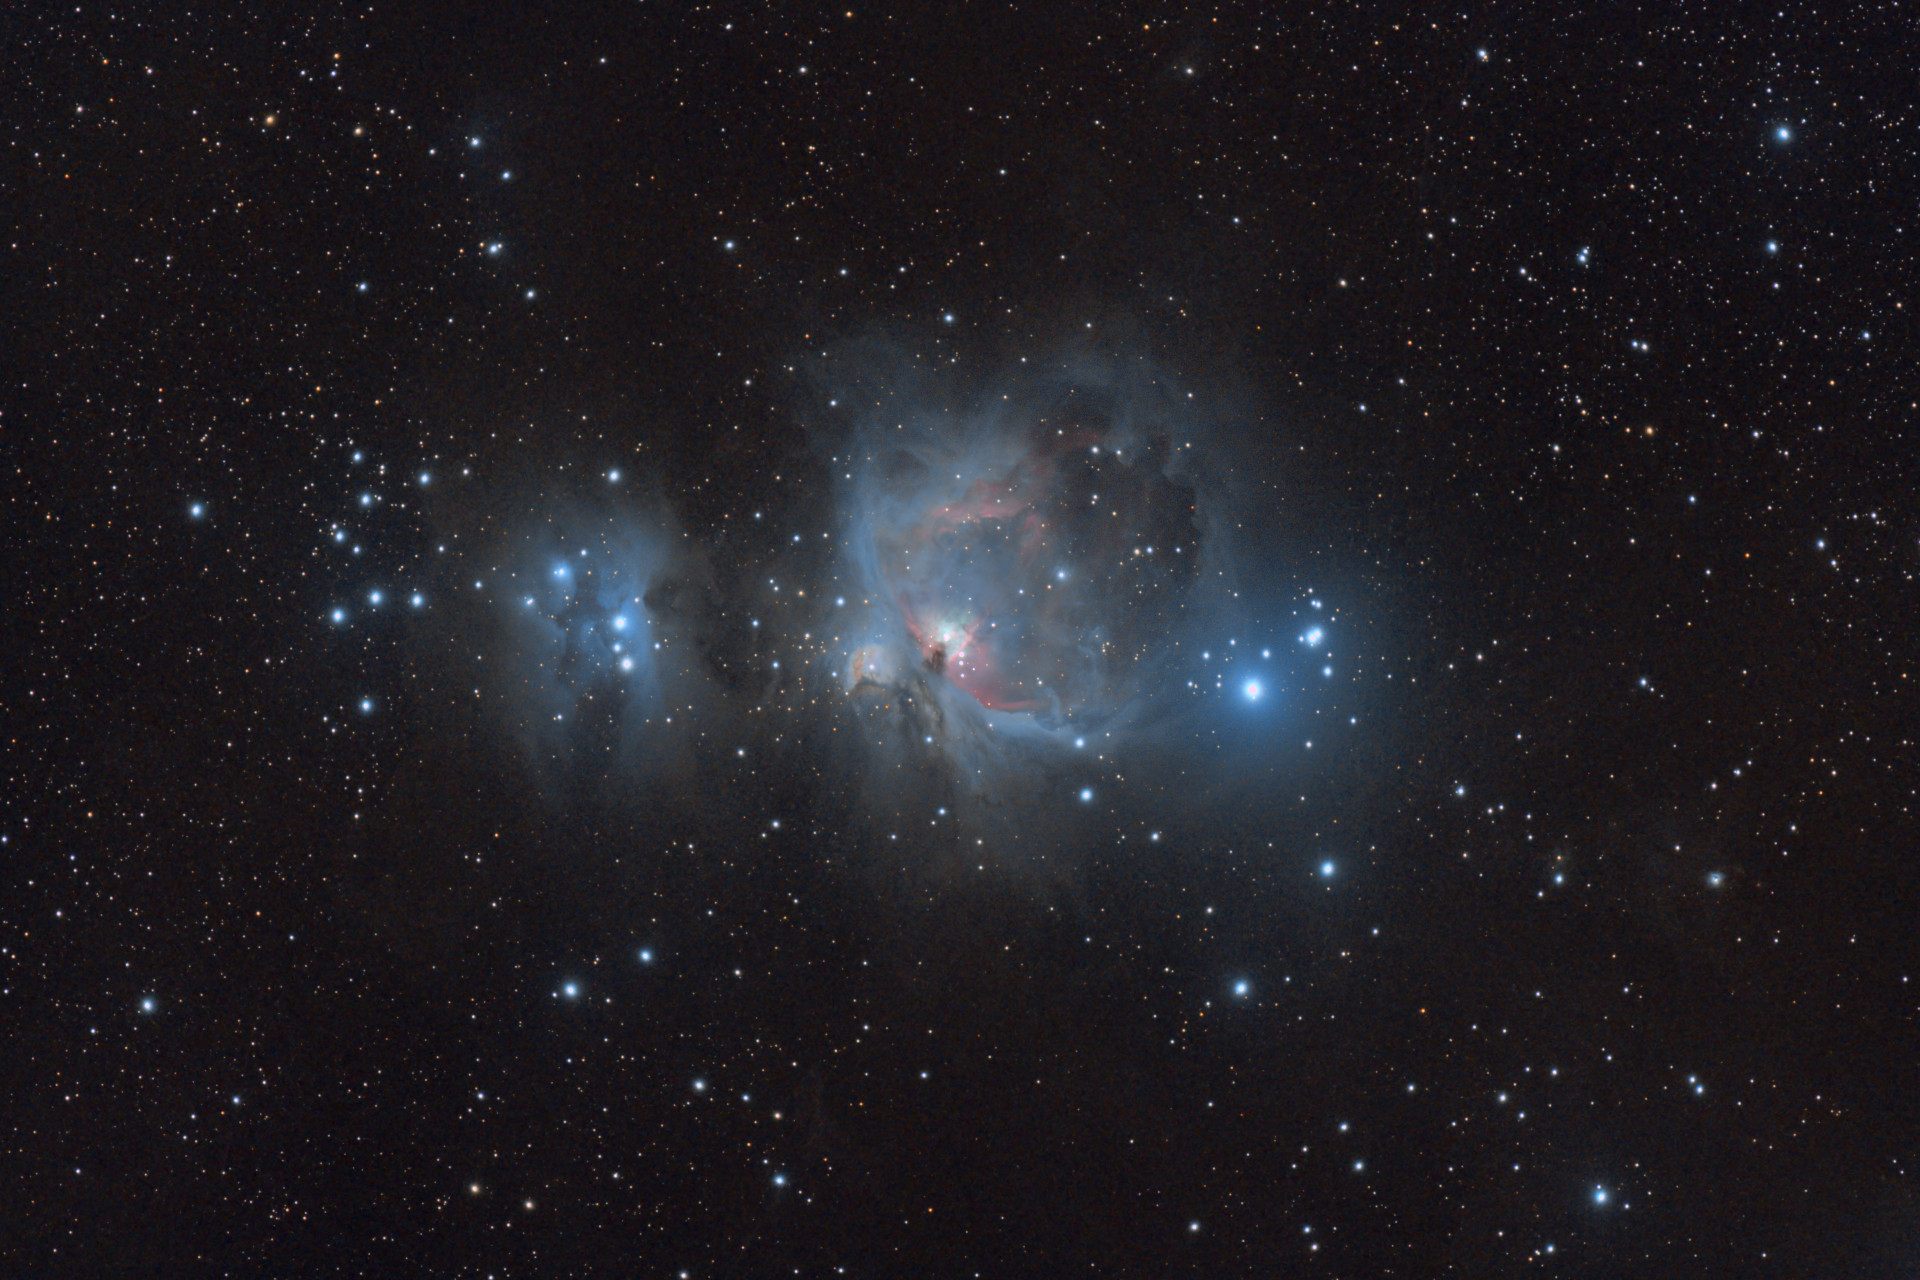 Messier 42 - The Great Orion Nebula